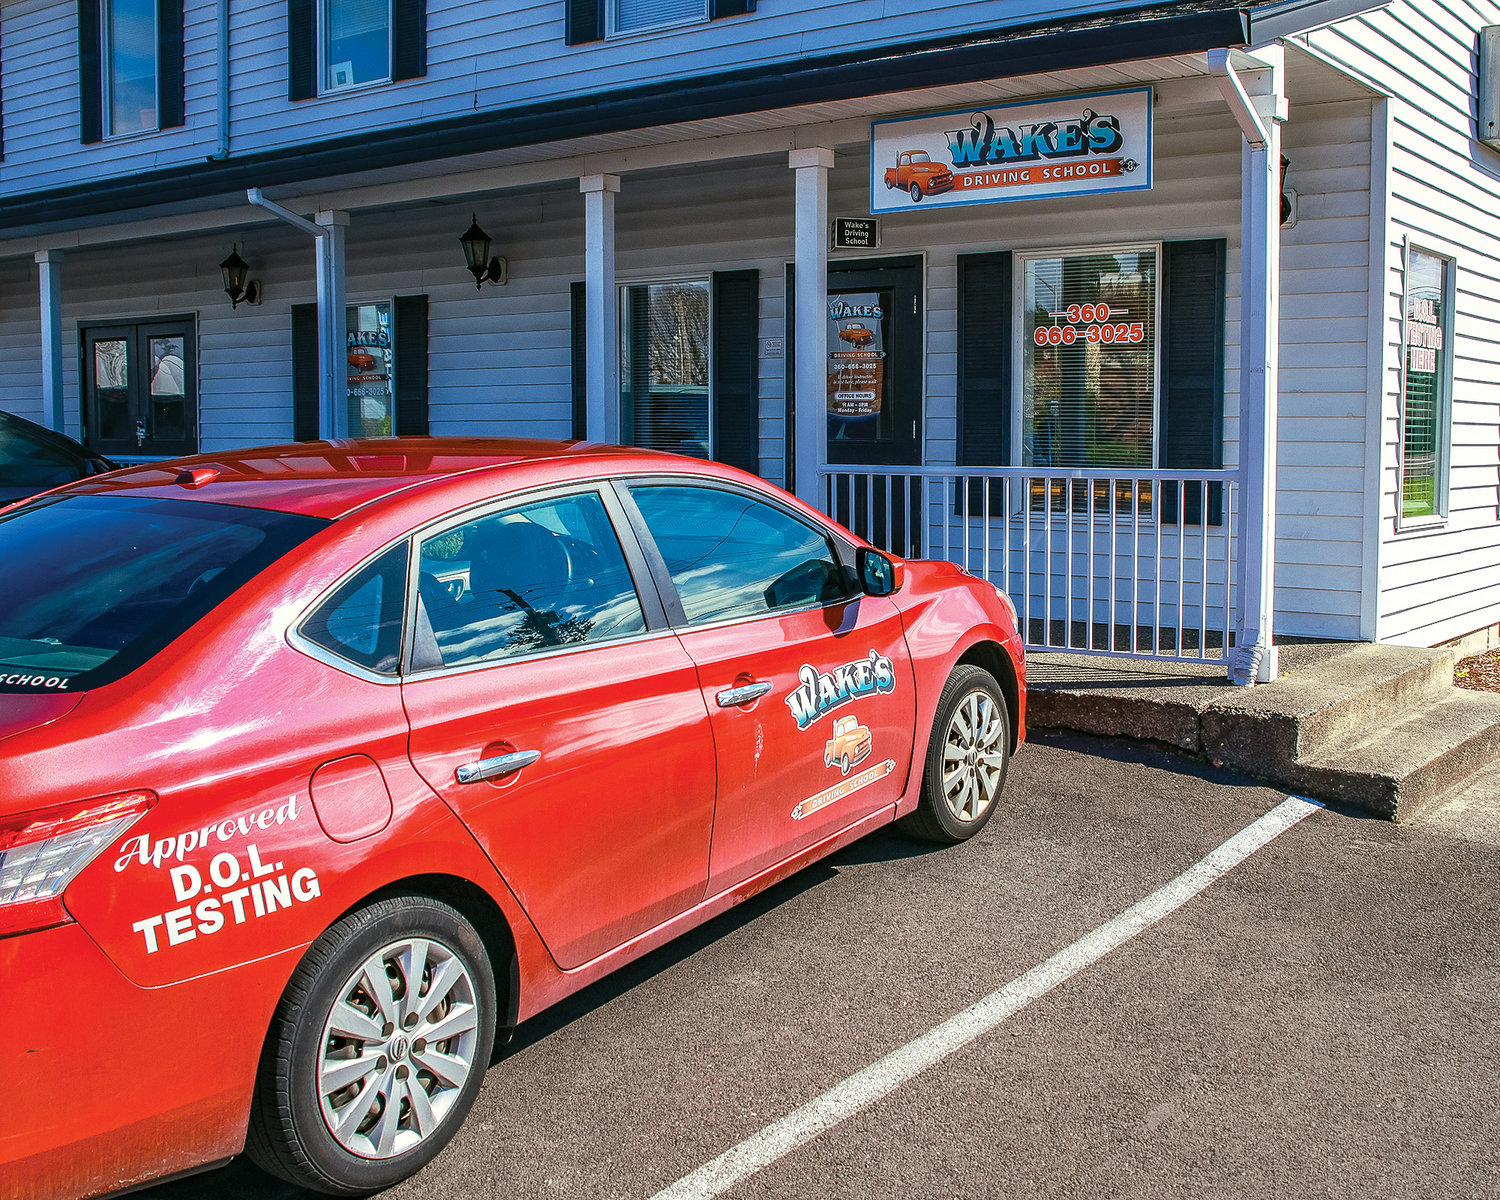 Wake’s Driving School is the only driver’s ed program in Battle Ground. It is located at 105 W. Main St. in unit 103.